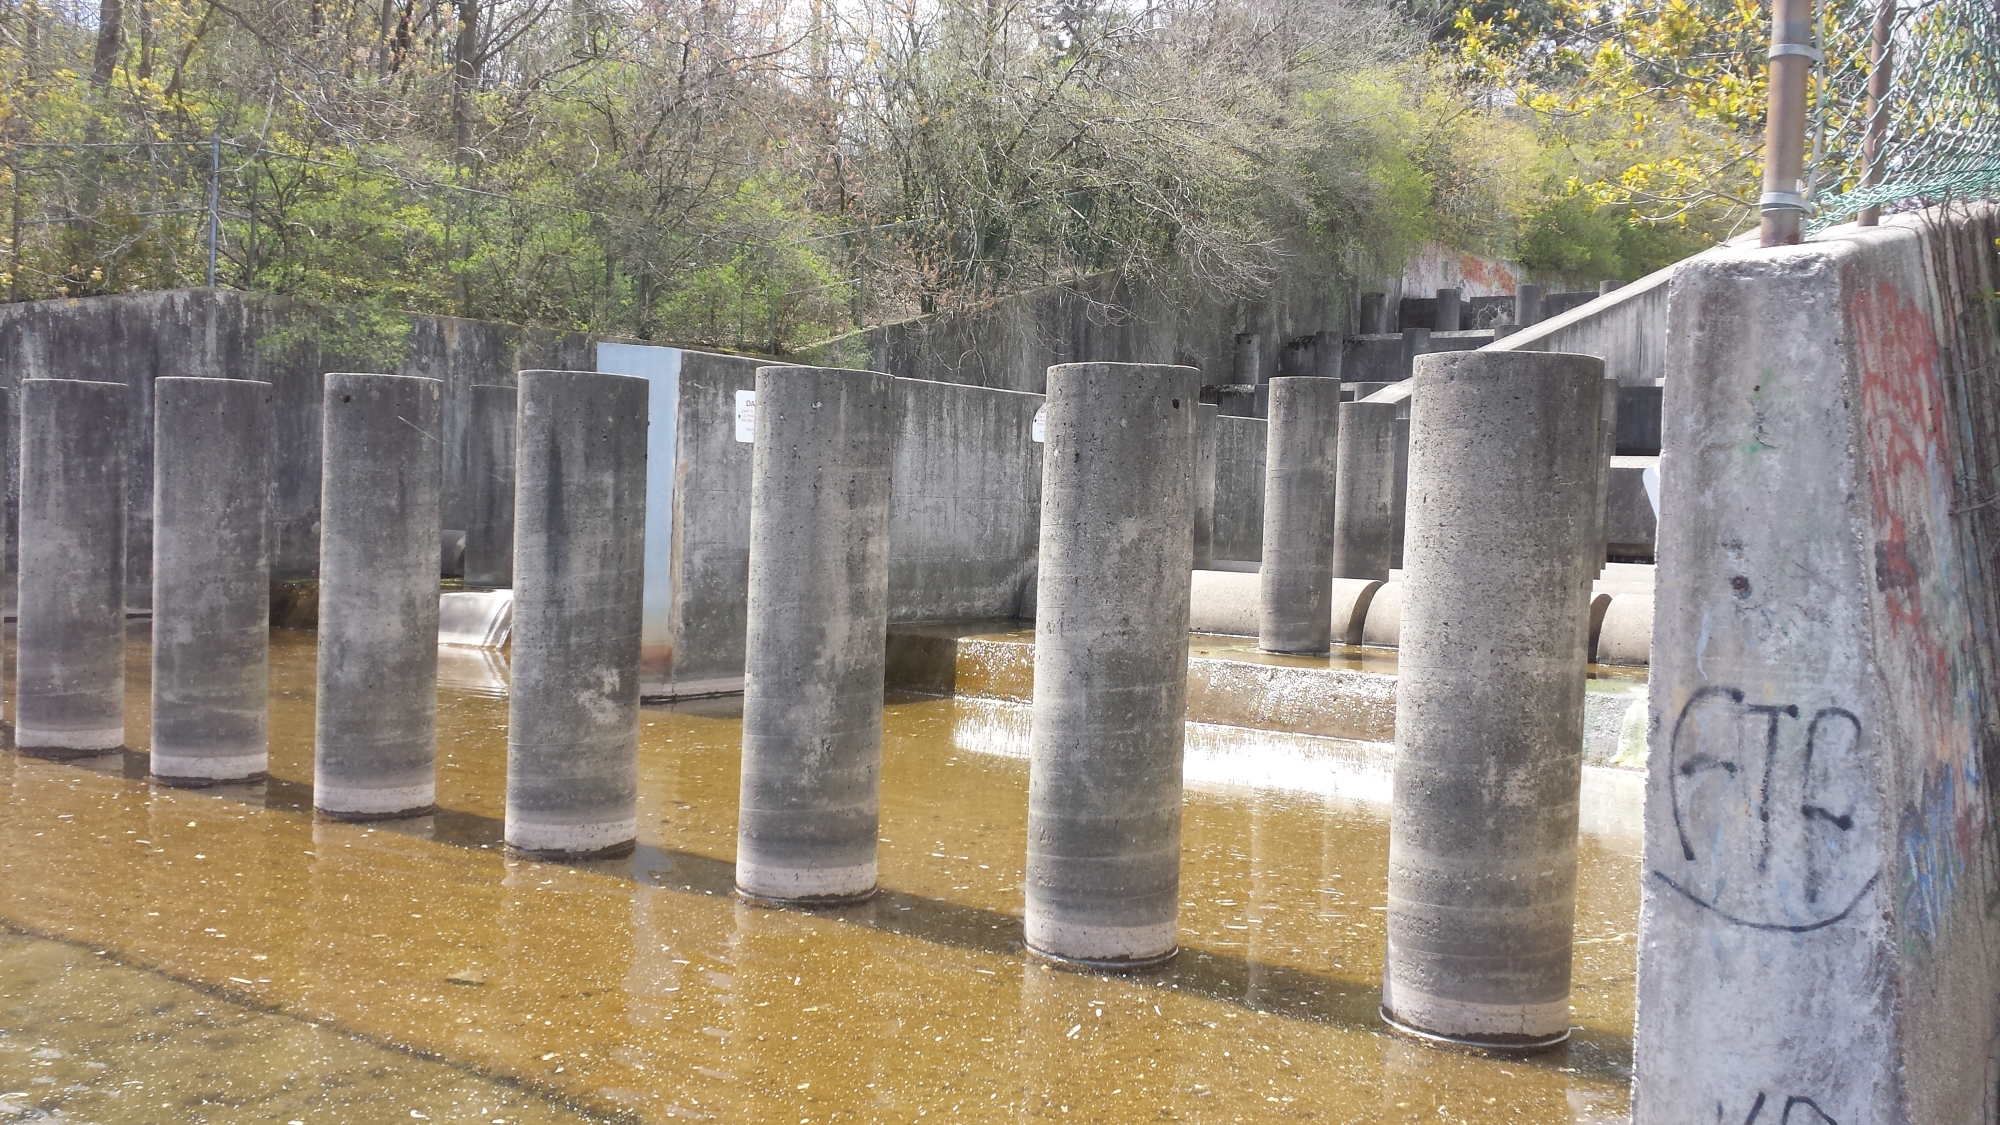 Concrete pillars for an unfinished dam on the Credit River